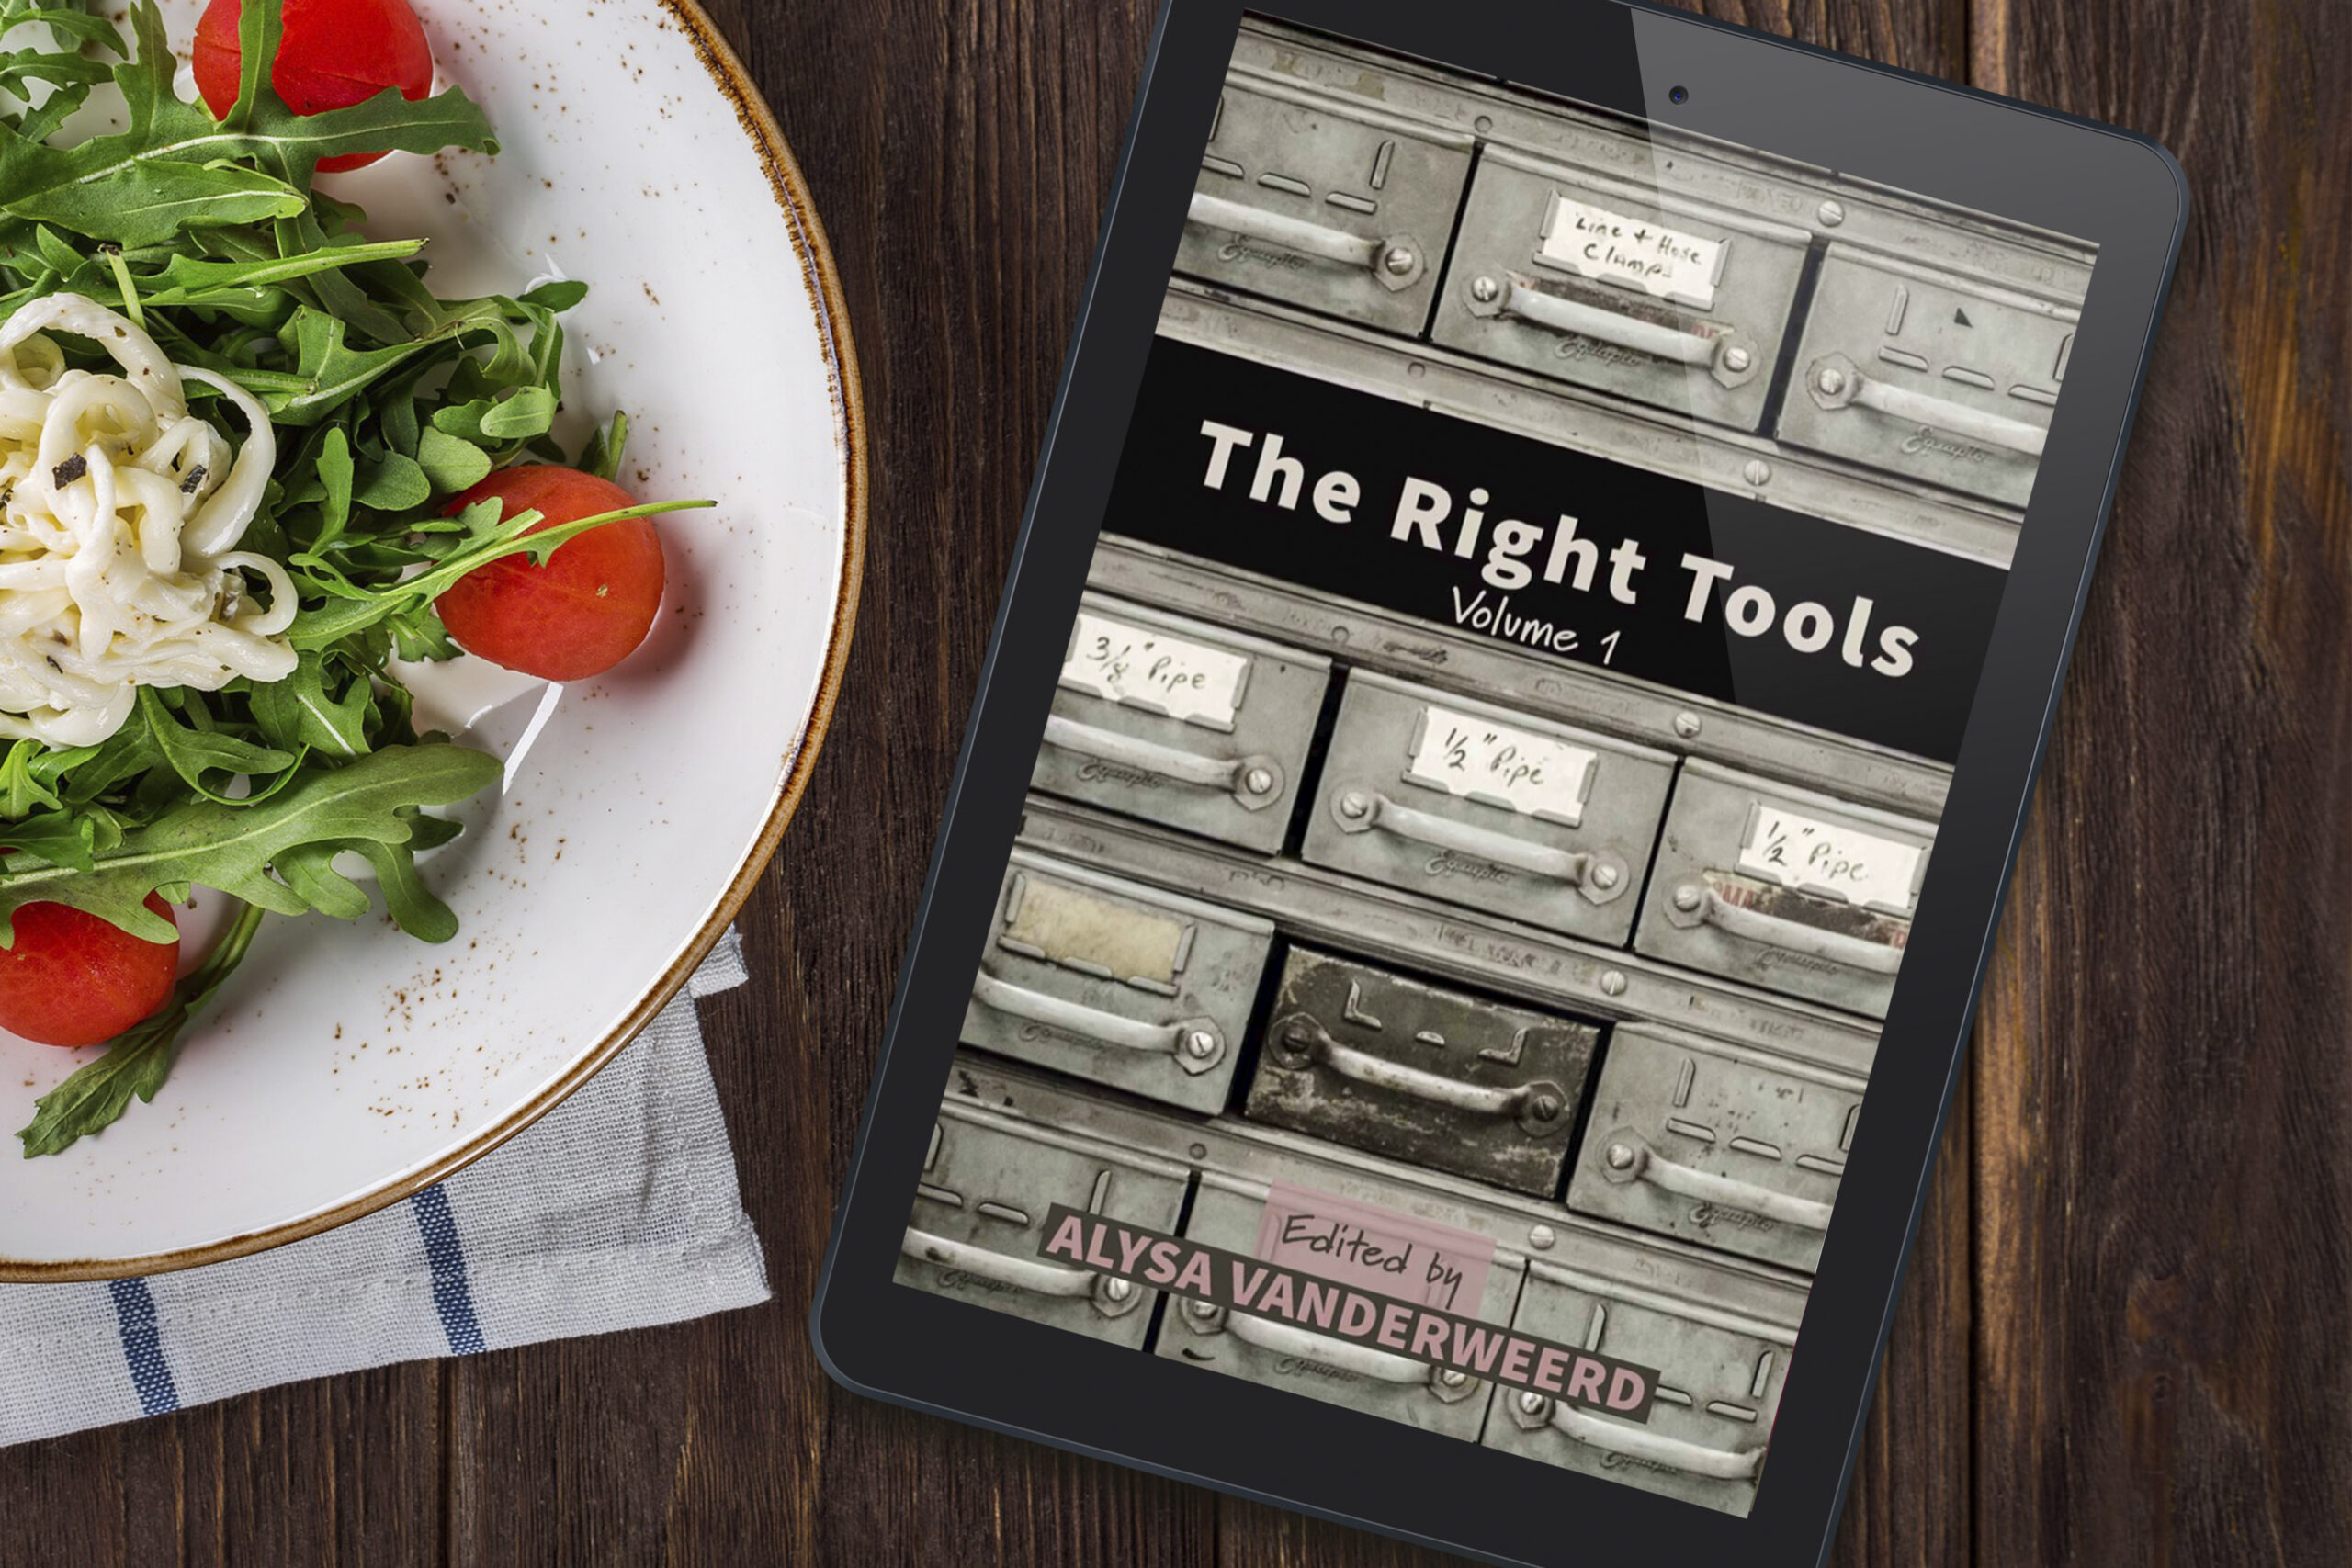 The Right Tools Volume 1